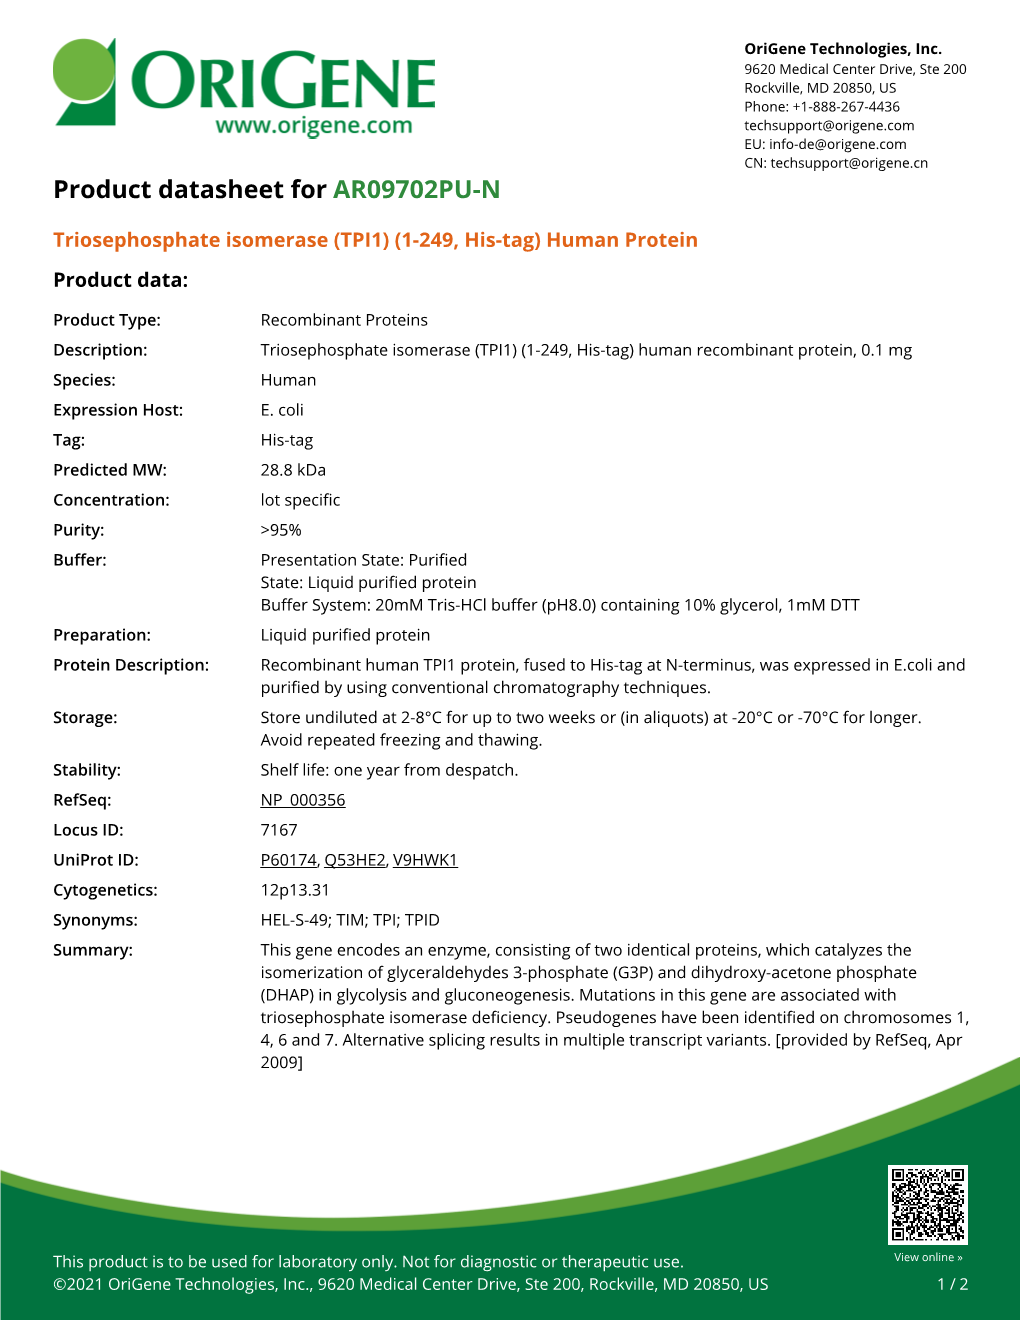 Triosephosphate Isomerase (TPI1) (1-249, His-Tag) Human Protein Product Data